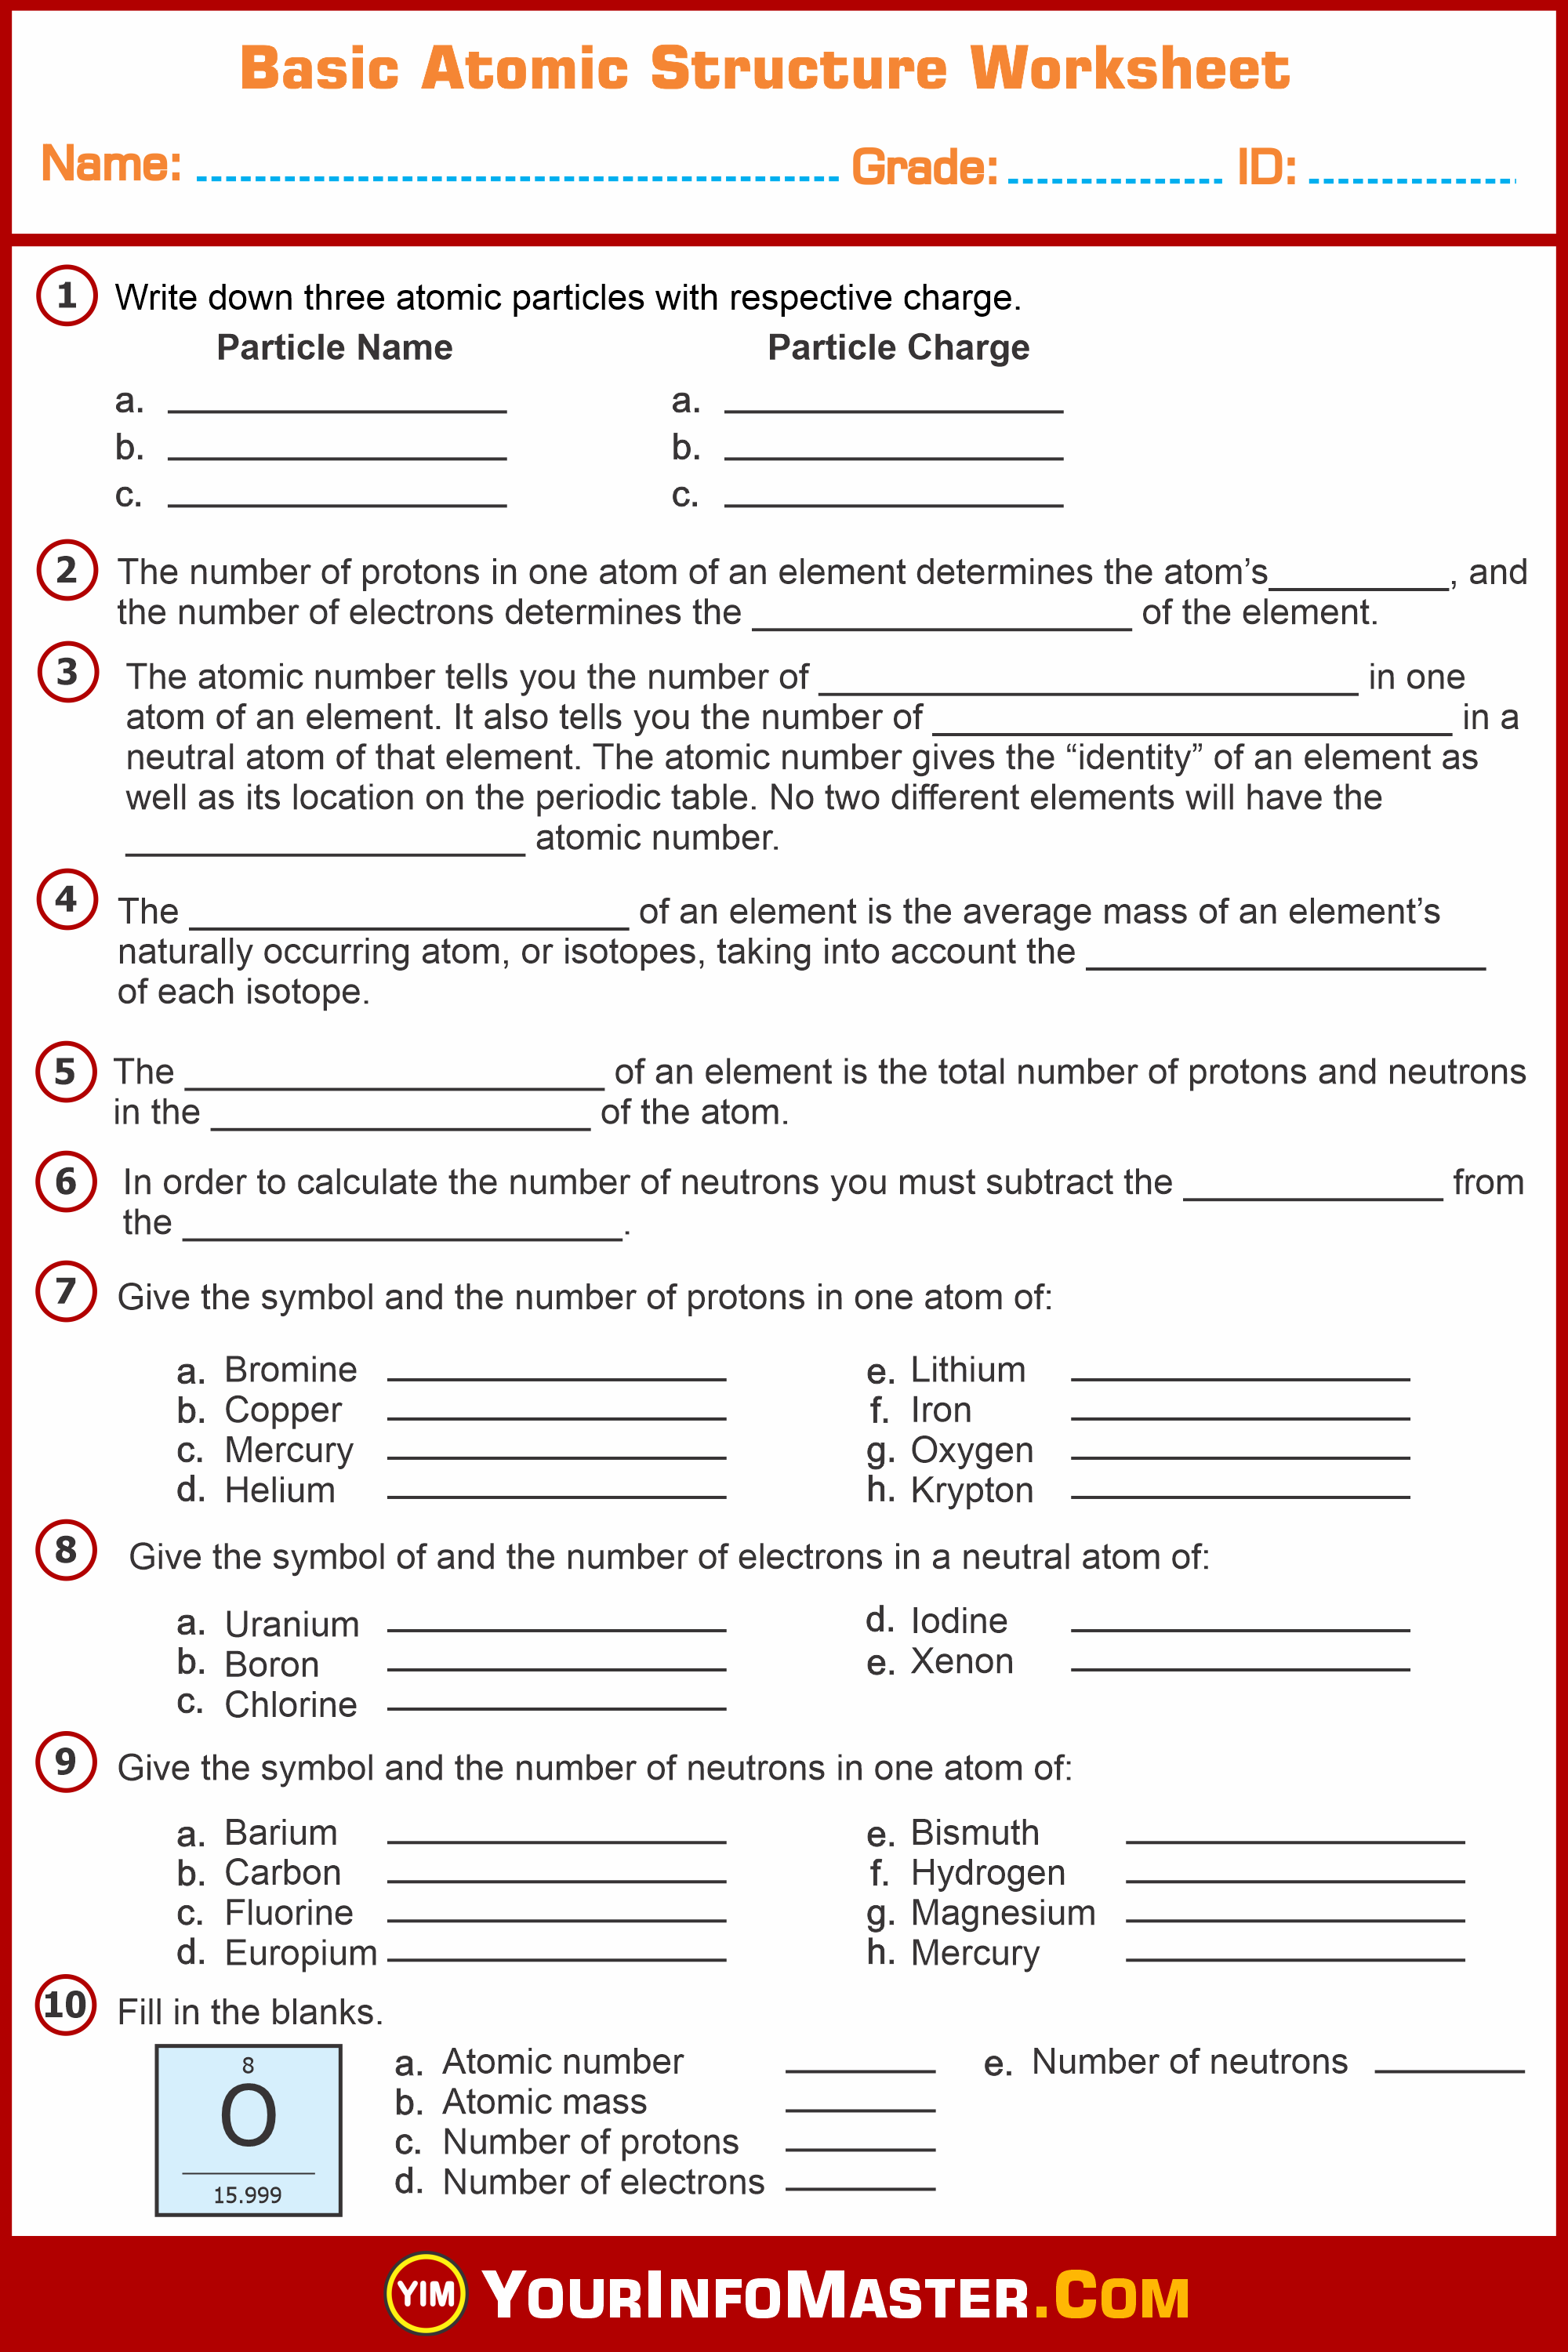 Basic Atomic Structure Worksheet - Your Info Master Pertaining To Atomic Structure Practice Worksheet Answers